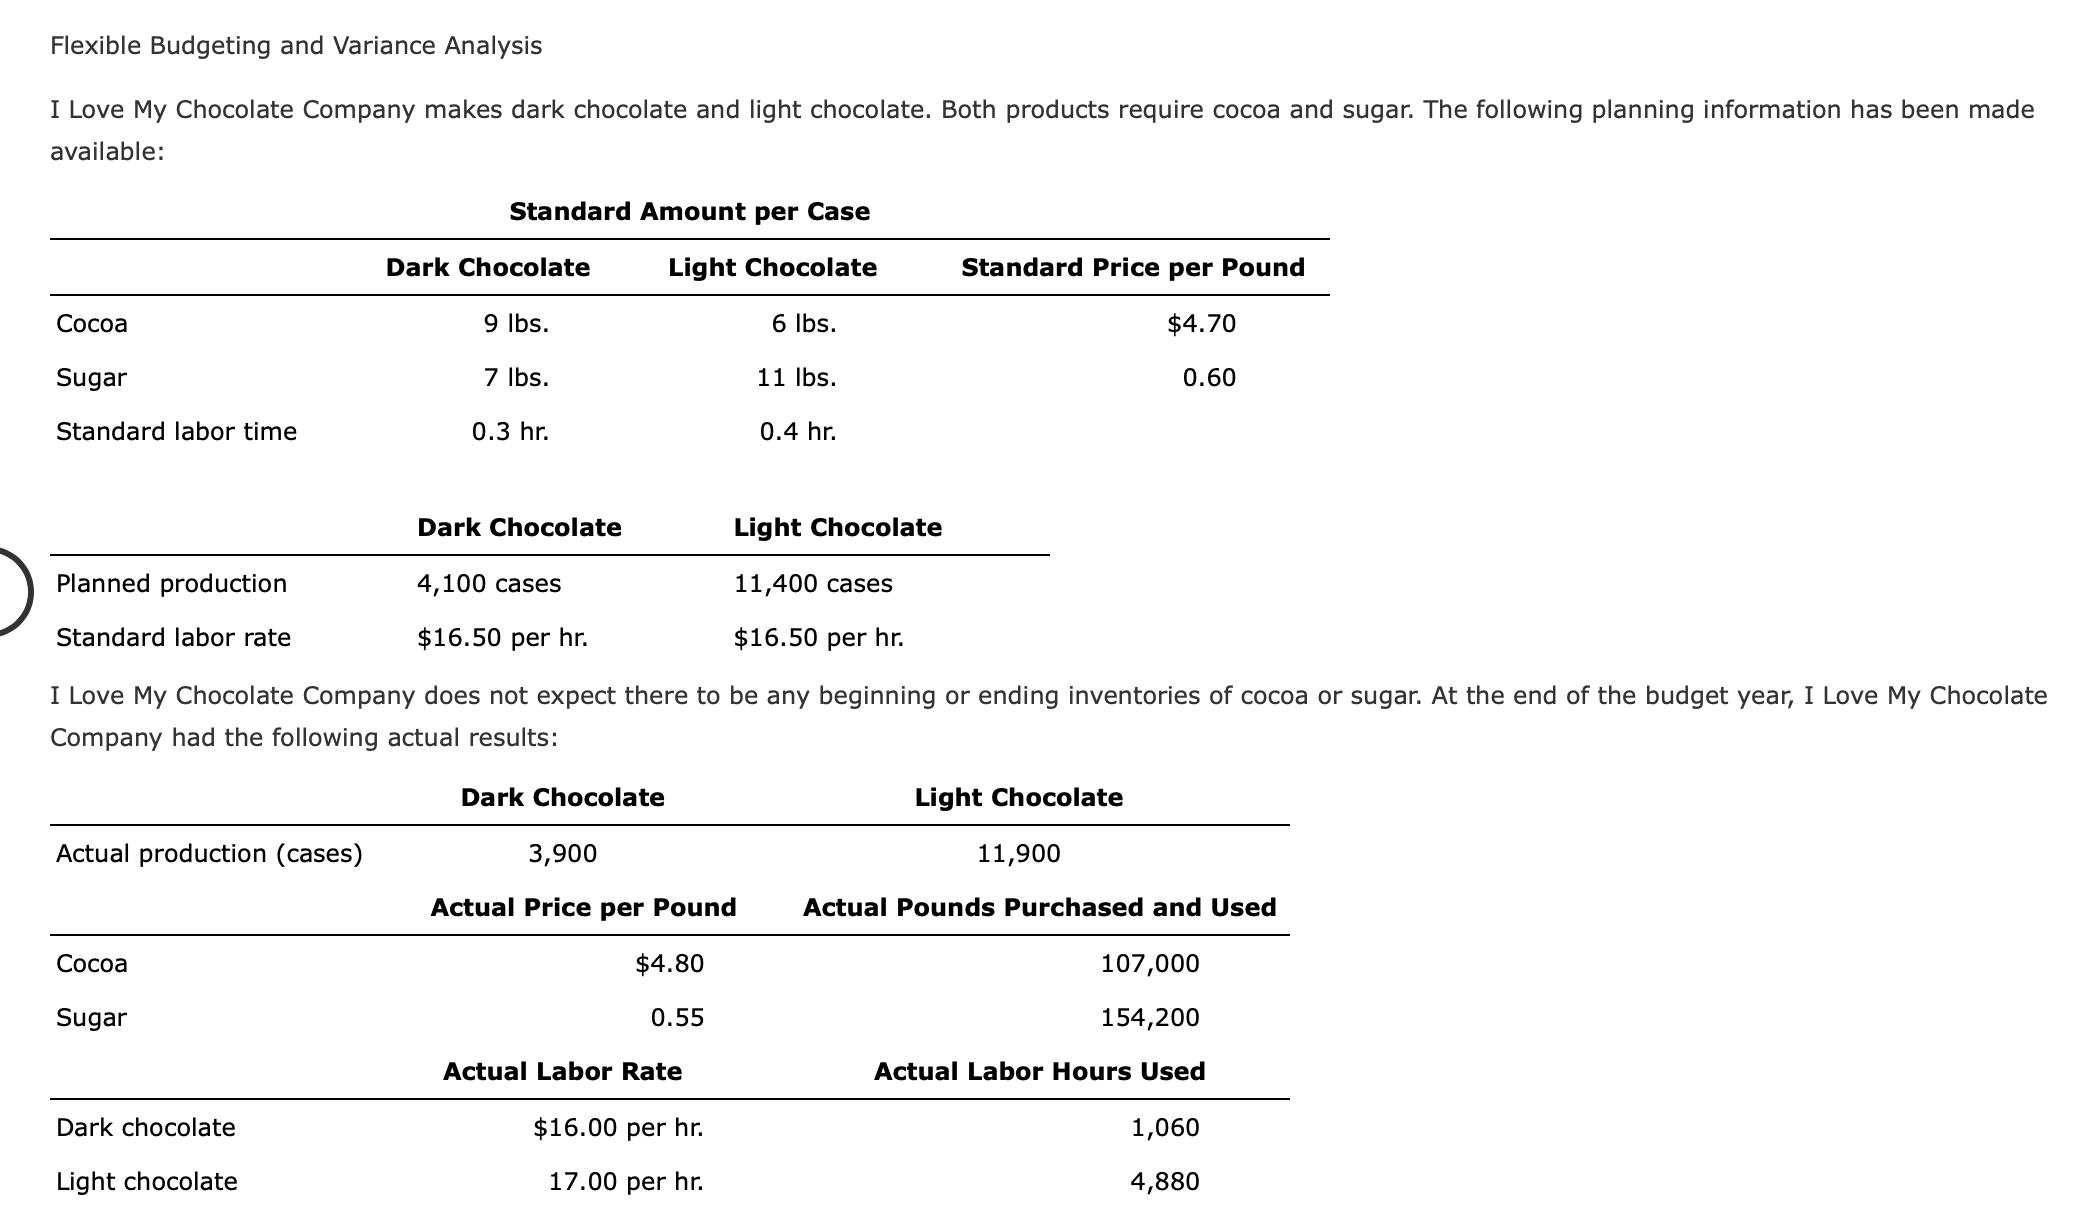 Flexible Budgeting and Variance Analysis
I Love My Chocolate Company makes dark chocolate and light chocolate. Both products require cocoa and sugar. The following planning information has been made
available:
Standard Amount per Case
Dark Chocolate
Light Chocolate
Standard Price per Pound
Сосоа
9 Ibs.
6 Ibs.
$4.70
Sugar
7 Ibs.
11 Ibs.
0.60
Standard labor time
0.3 hr.
0.4 hr.
Dark Chocolate
Light Chocolate
Planned production
4,100 cases
11,400 cases
Standard labor rate
$16.50 per hr.
$16.50 per hr.
I Love My Chocolate Company does not expect there to be any beginning or ending inventories of cocoa or sugar. At the end of the budget year, I Love My Chocolate
Company had the following actual results:
Dark Chocolate
Light Chocolate
Actual production (cases)
3,900
11,900
Actual Price per Pound
Actual Pounds Purchased and Used
Сосоа
$4.80
107,000
Sugar
0.55
154,200
Actual Labor Rate
Actual Labor Hours Used
Dark chocolate
$16.00 per hr.
1,060
Light chocolate
17.00 per hr.
4,880
